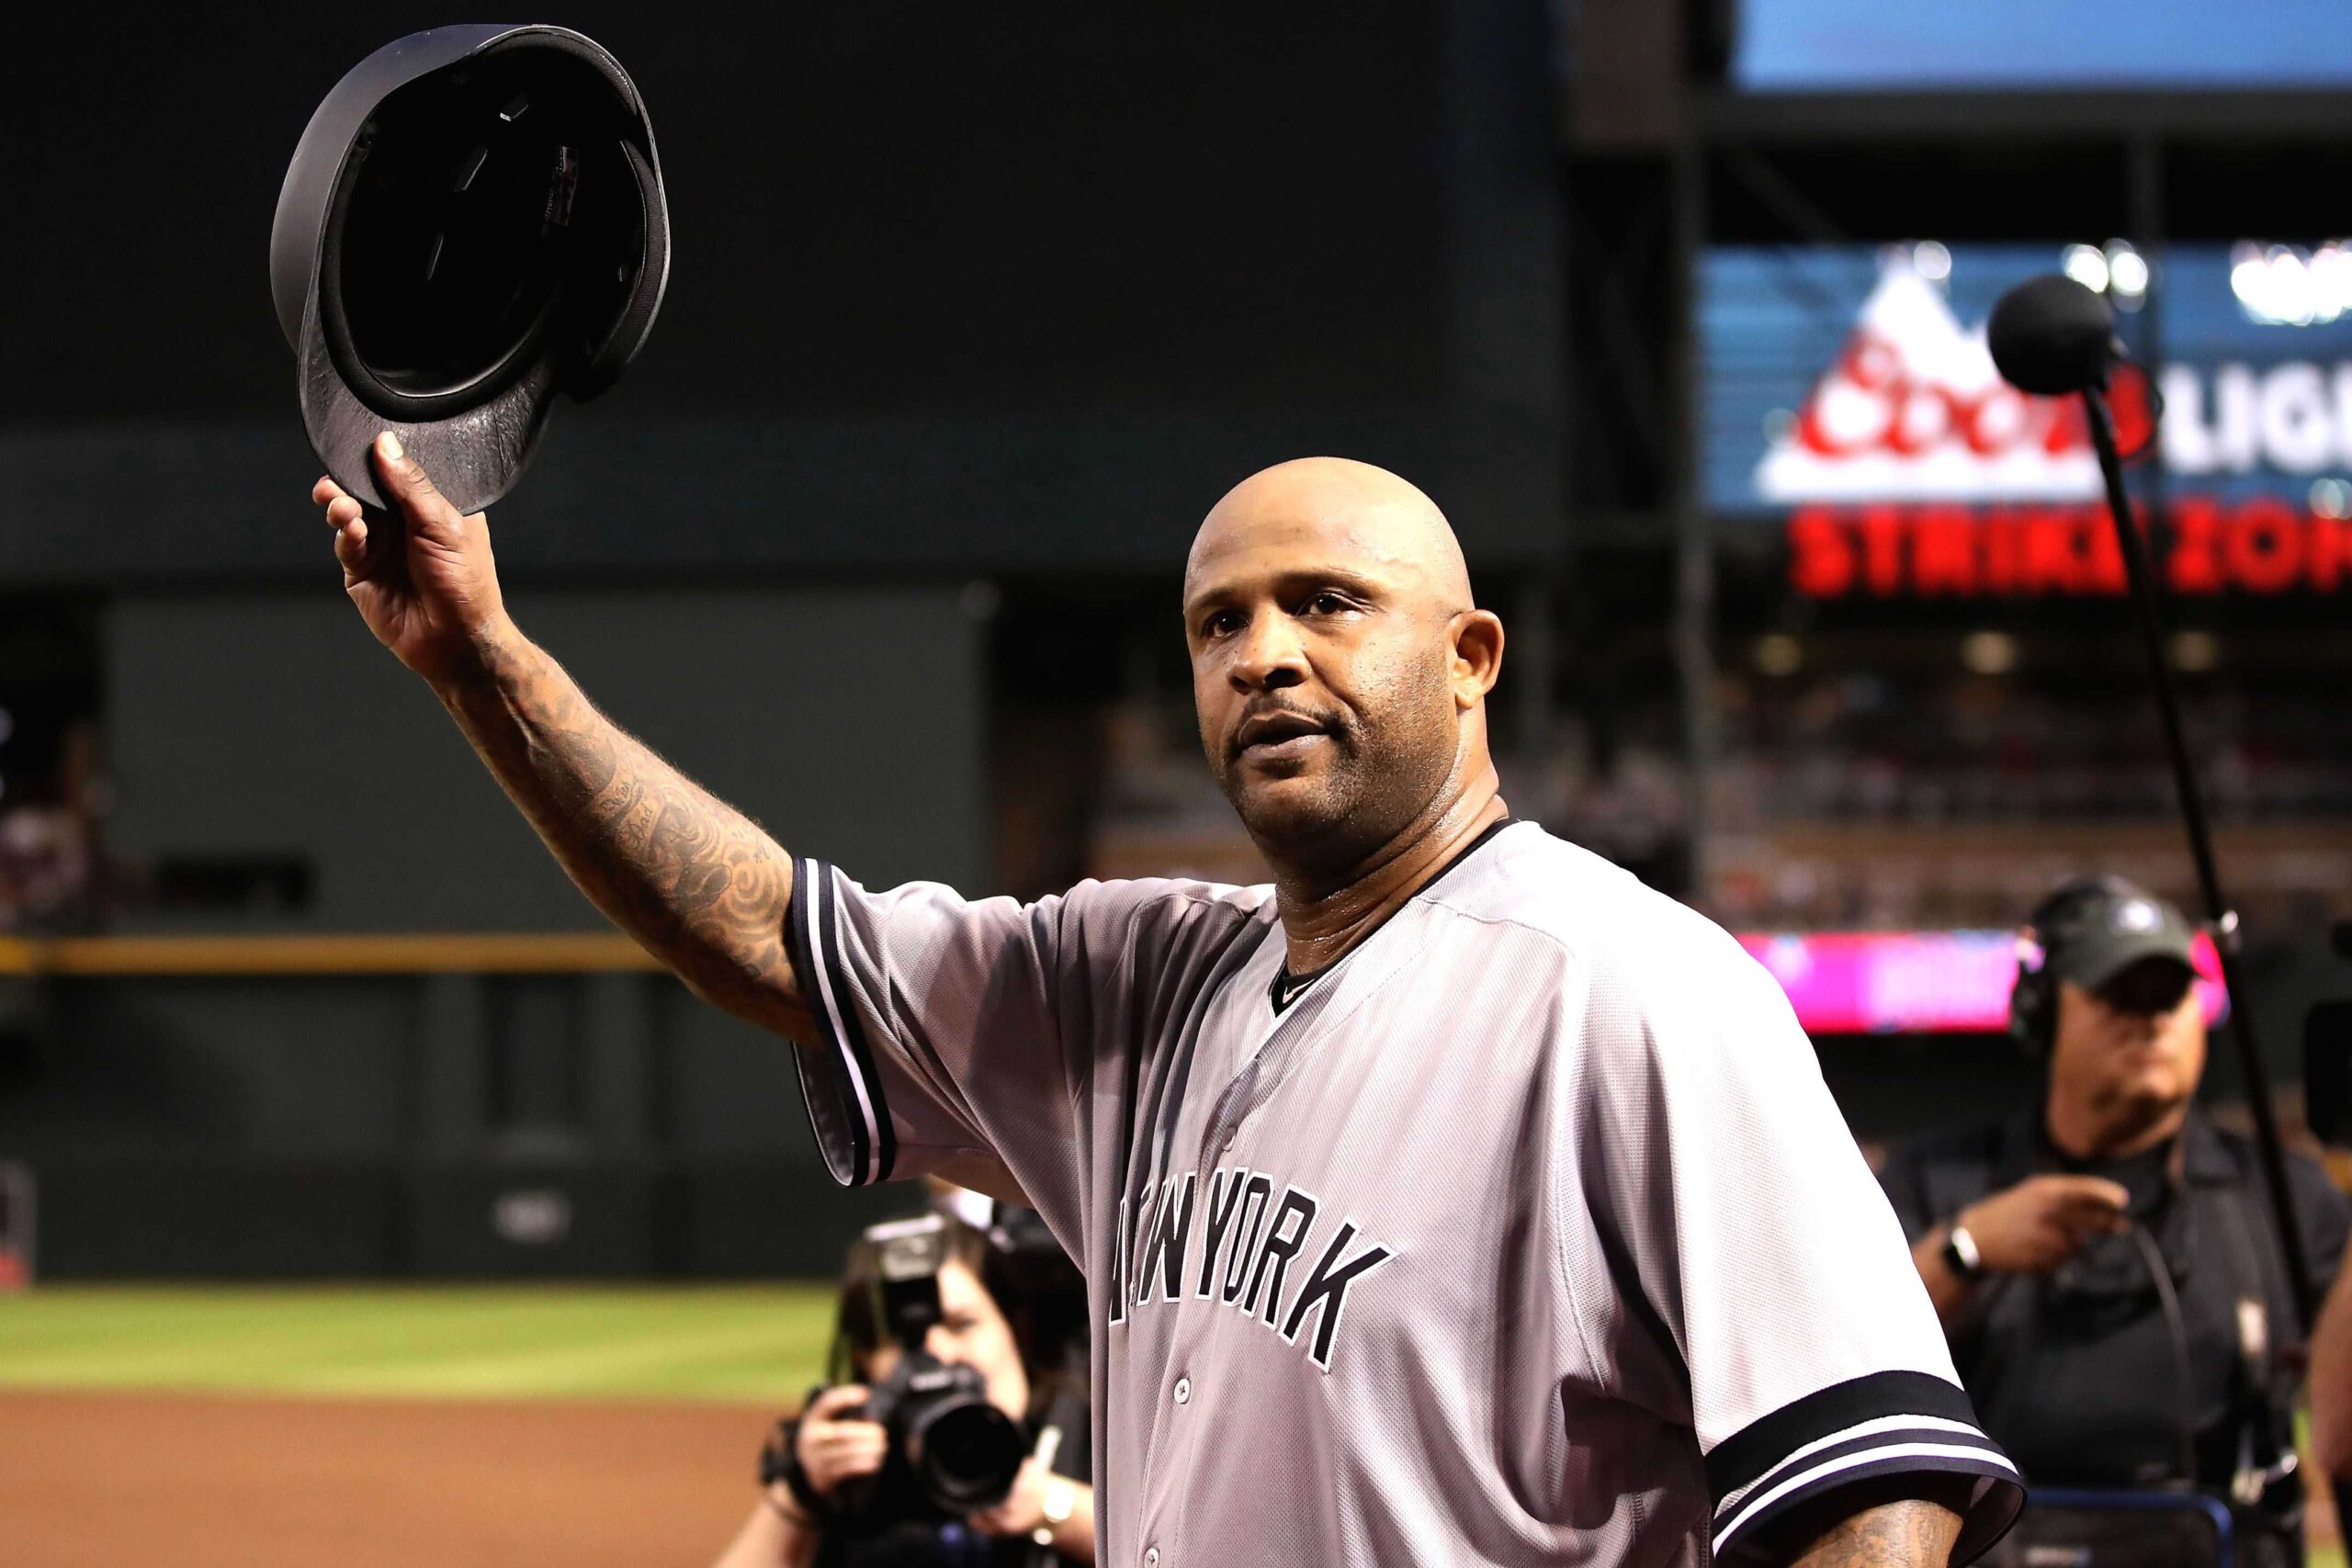  CC3K: CC Sabathia Becomes 17th Pitcher In MLB History To Reach 3,000 Strikeouts